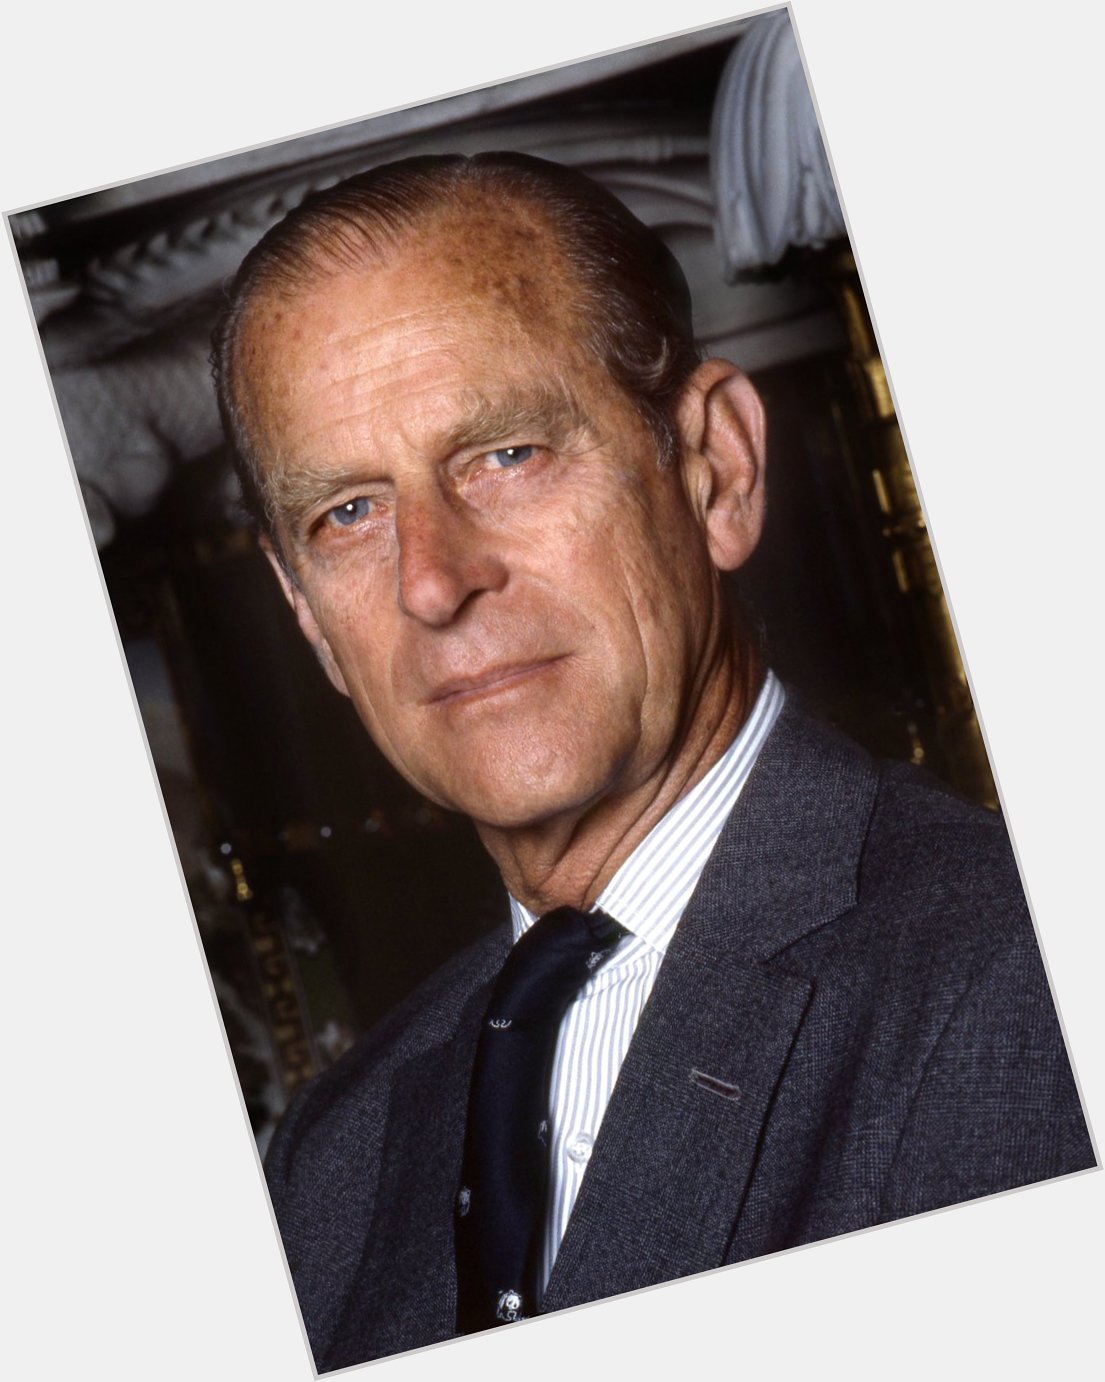 A Happy Birthday to Prince Phillip, Duke of Edinburgh today. May you rest in peace 